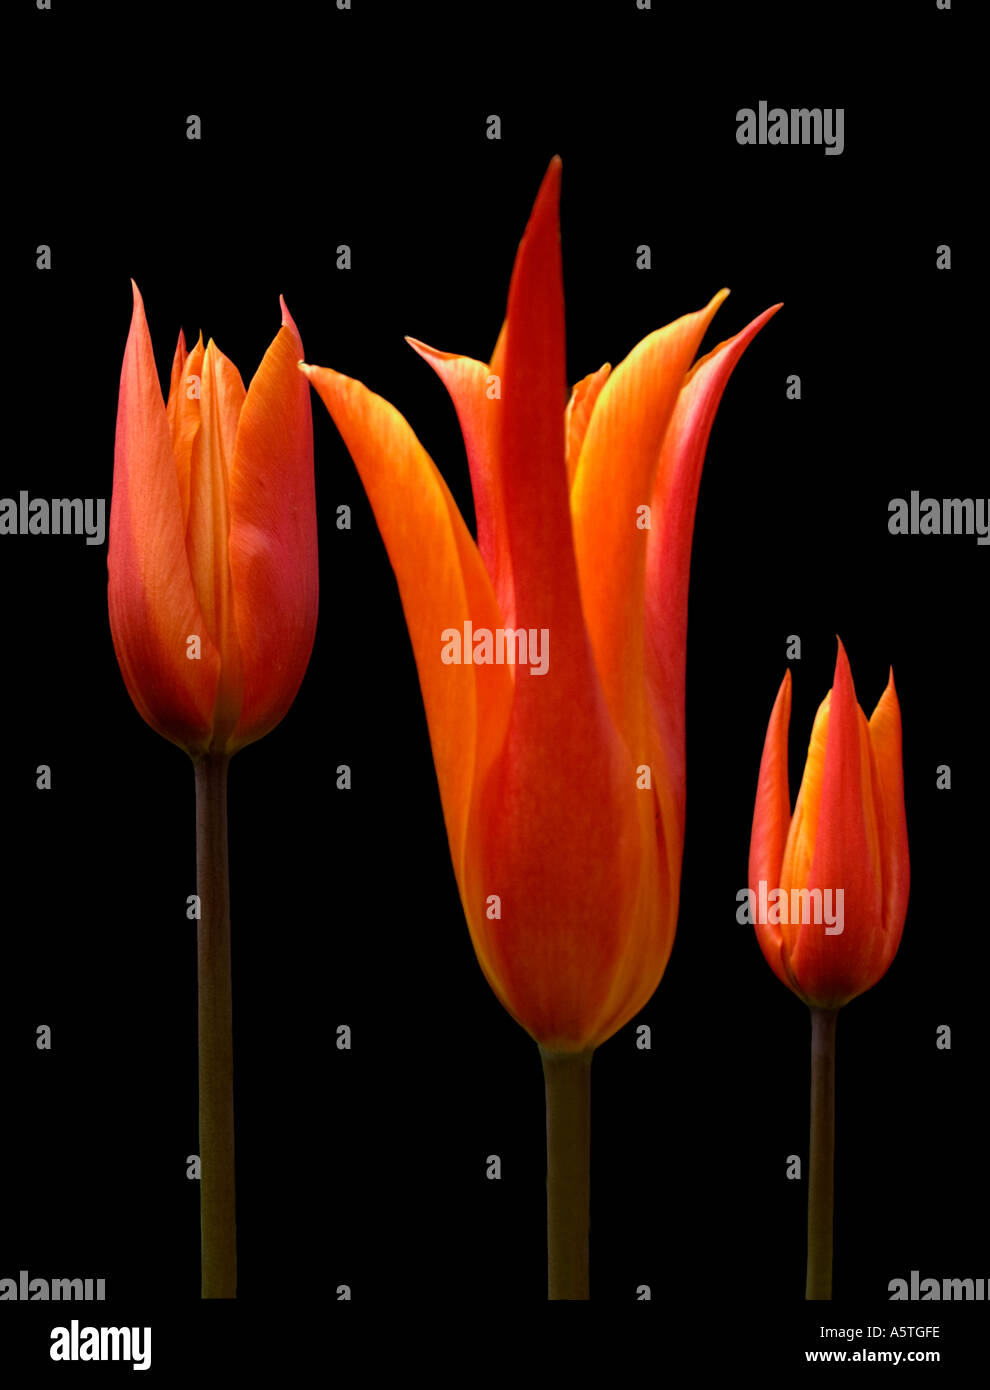 Three flame coloured tulips against a black background Stock Photo